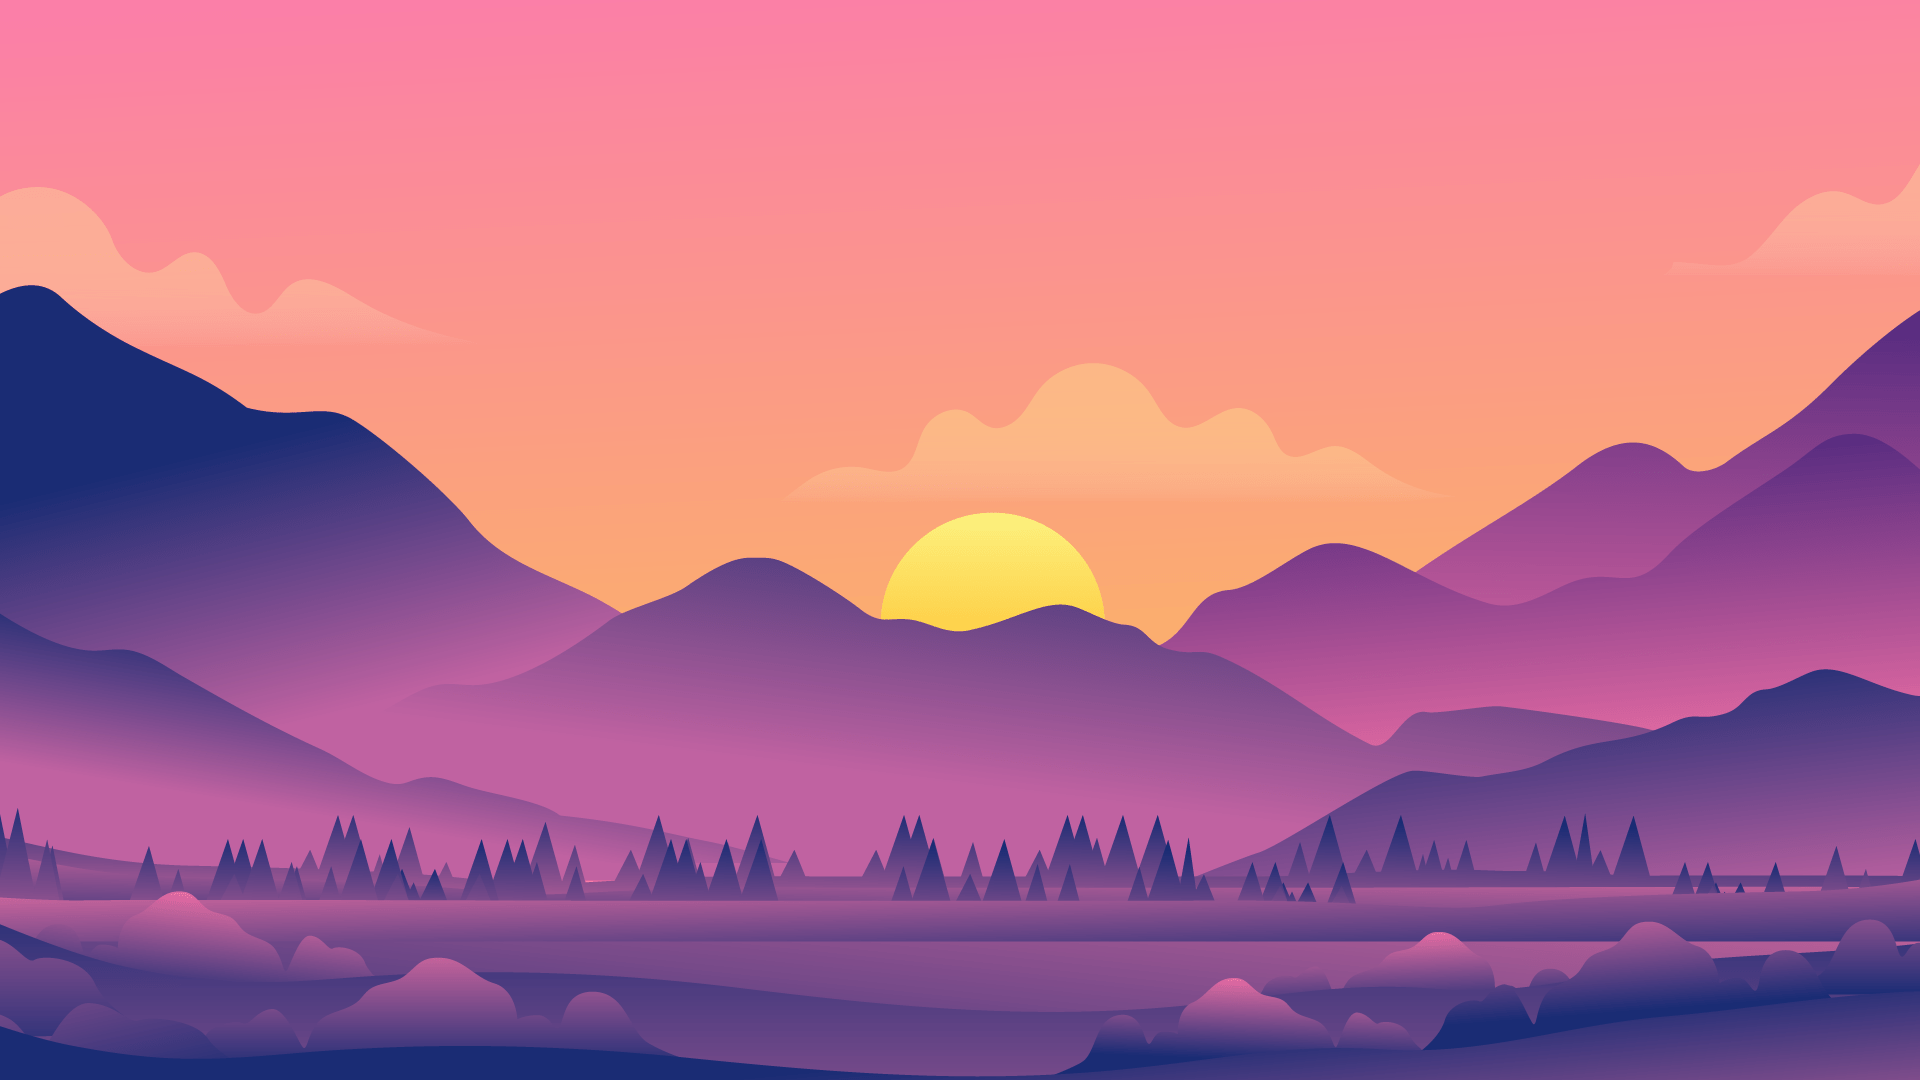 A sunset over the mountains with trees - 1920x1080, landscape